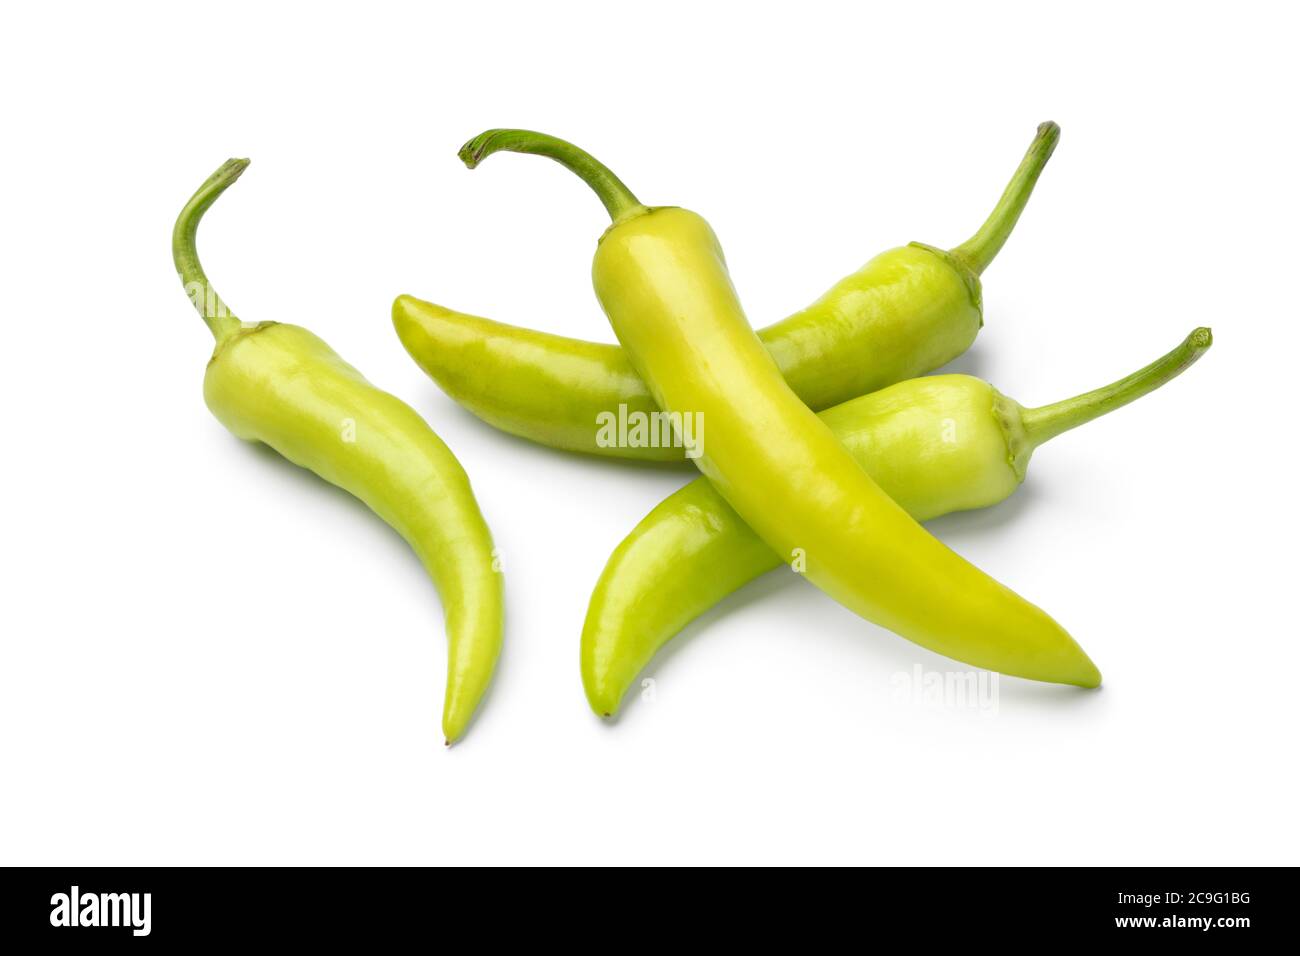 Heap of  young yellow Hungarian wax pepper close up isolated on white background Stock Photo